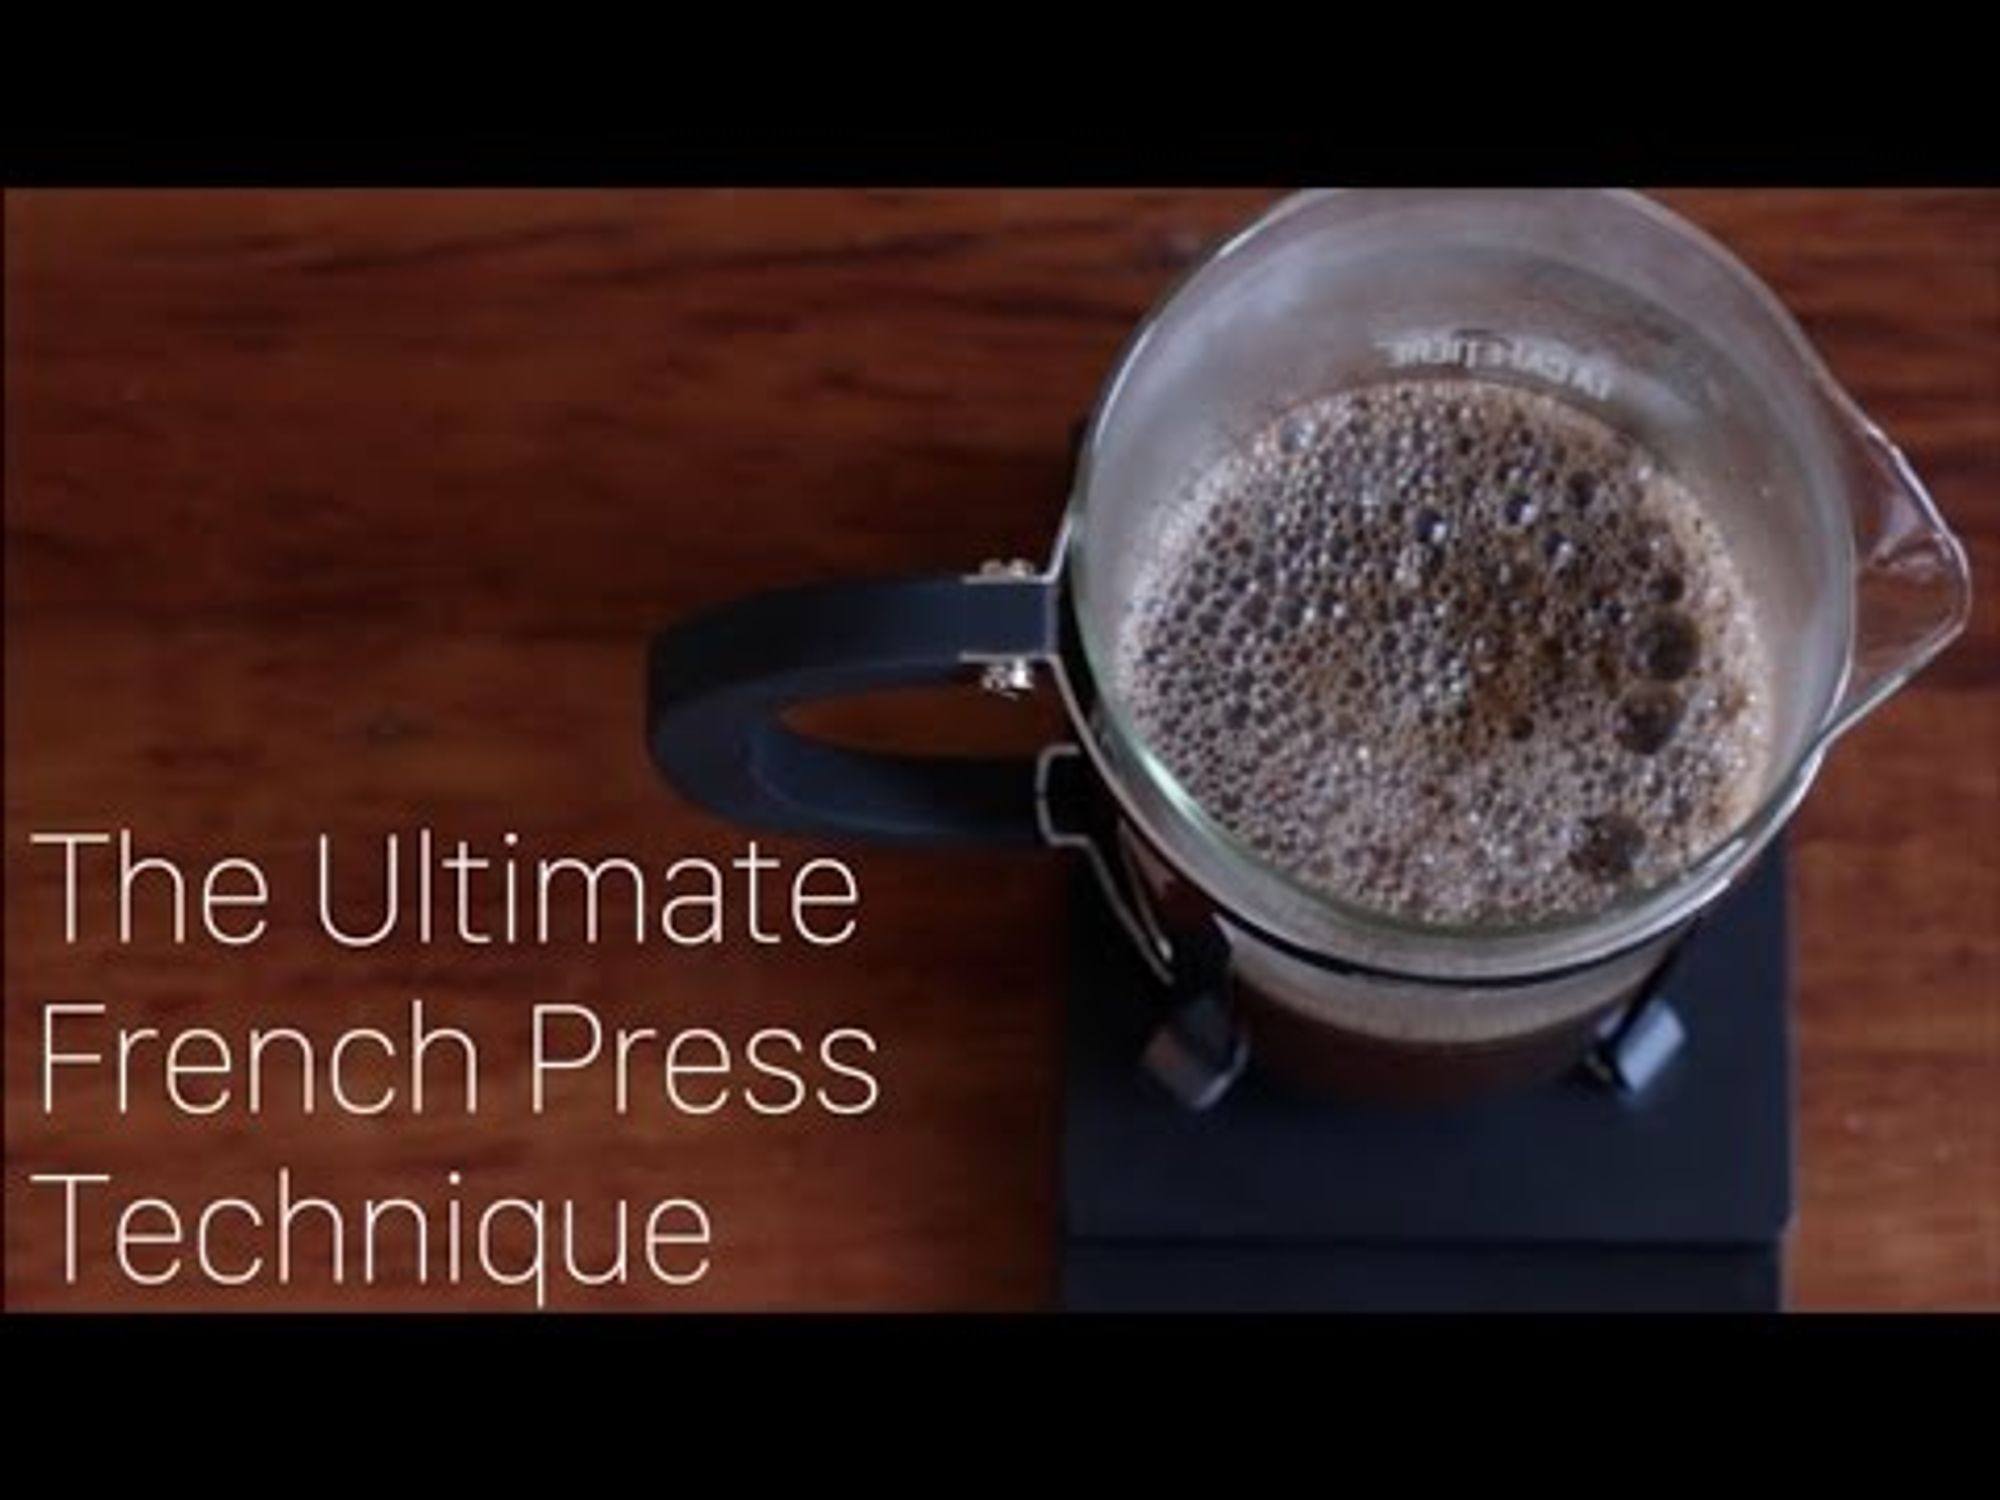 The Ultimate French Press Technique